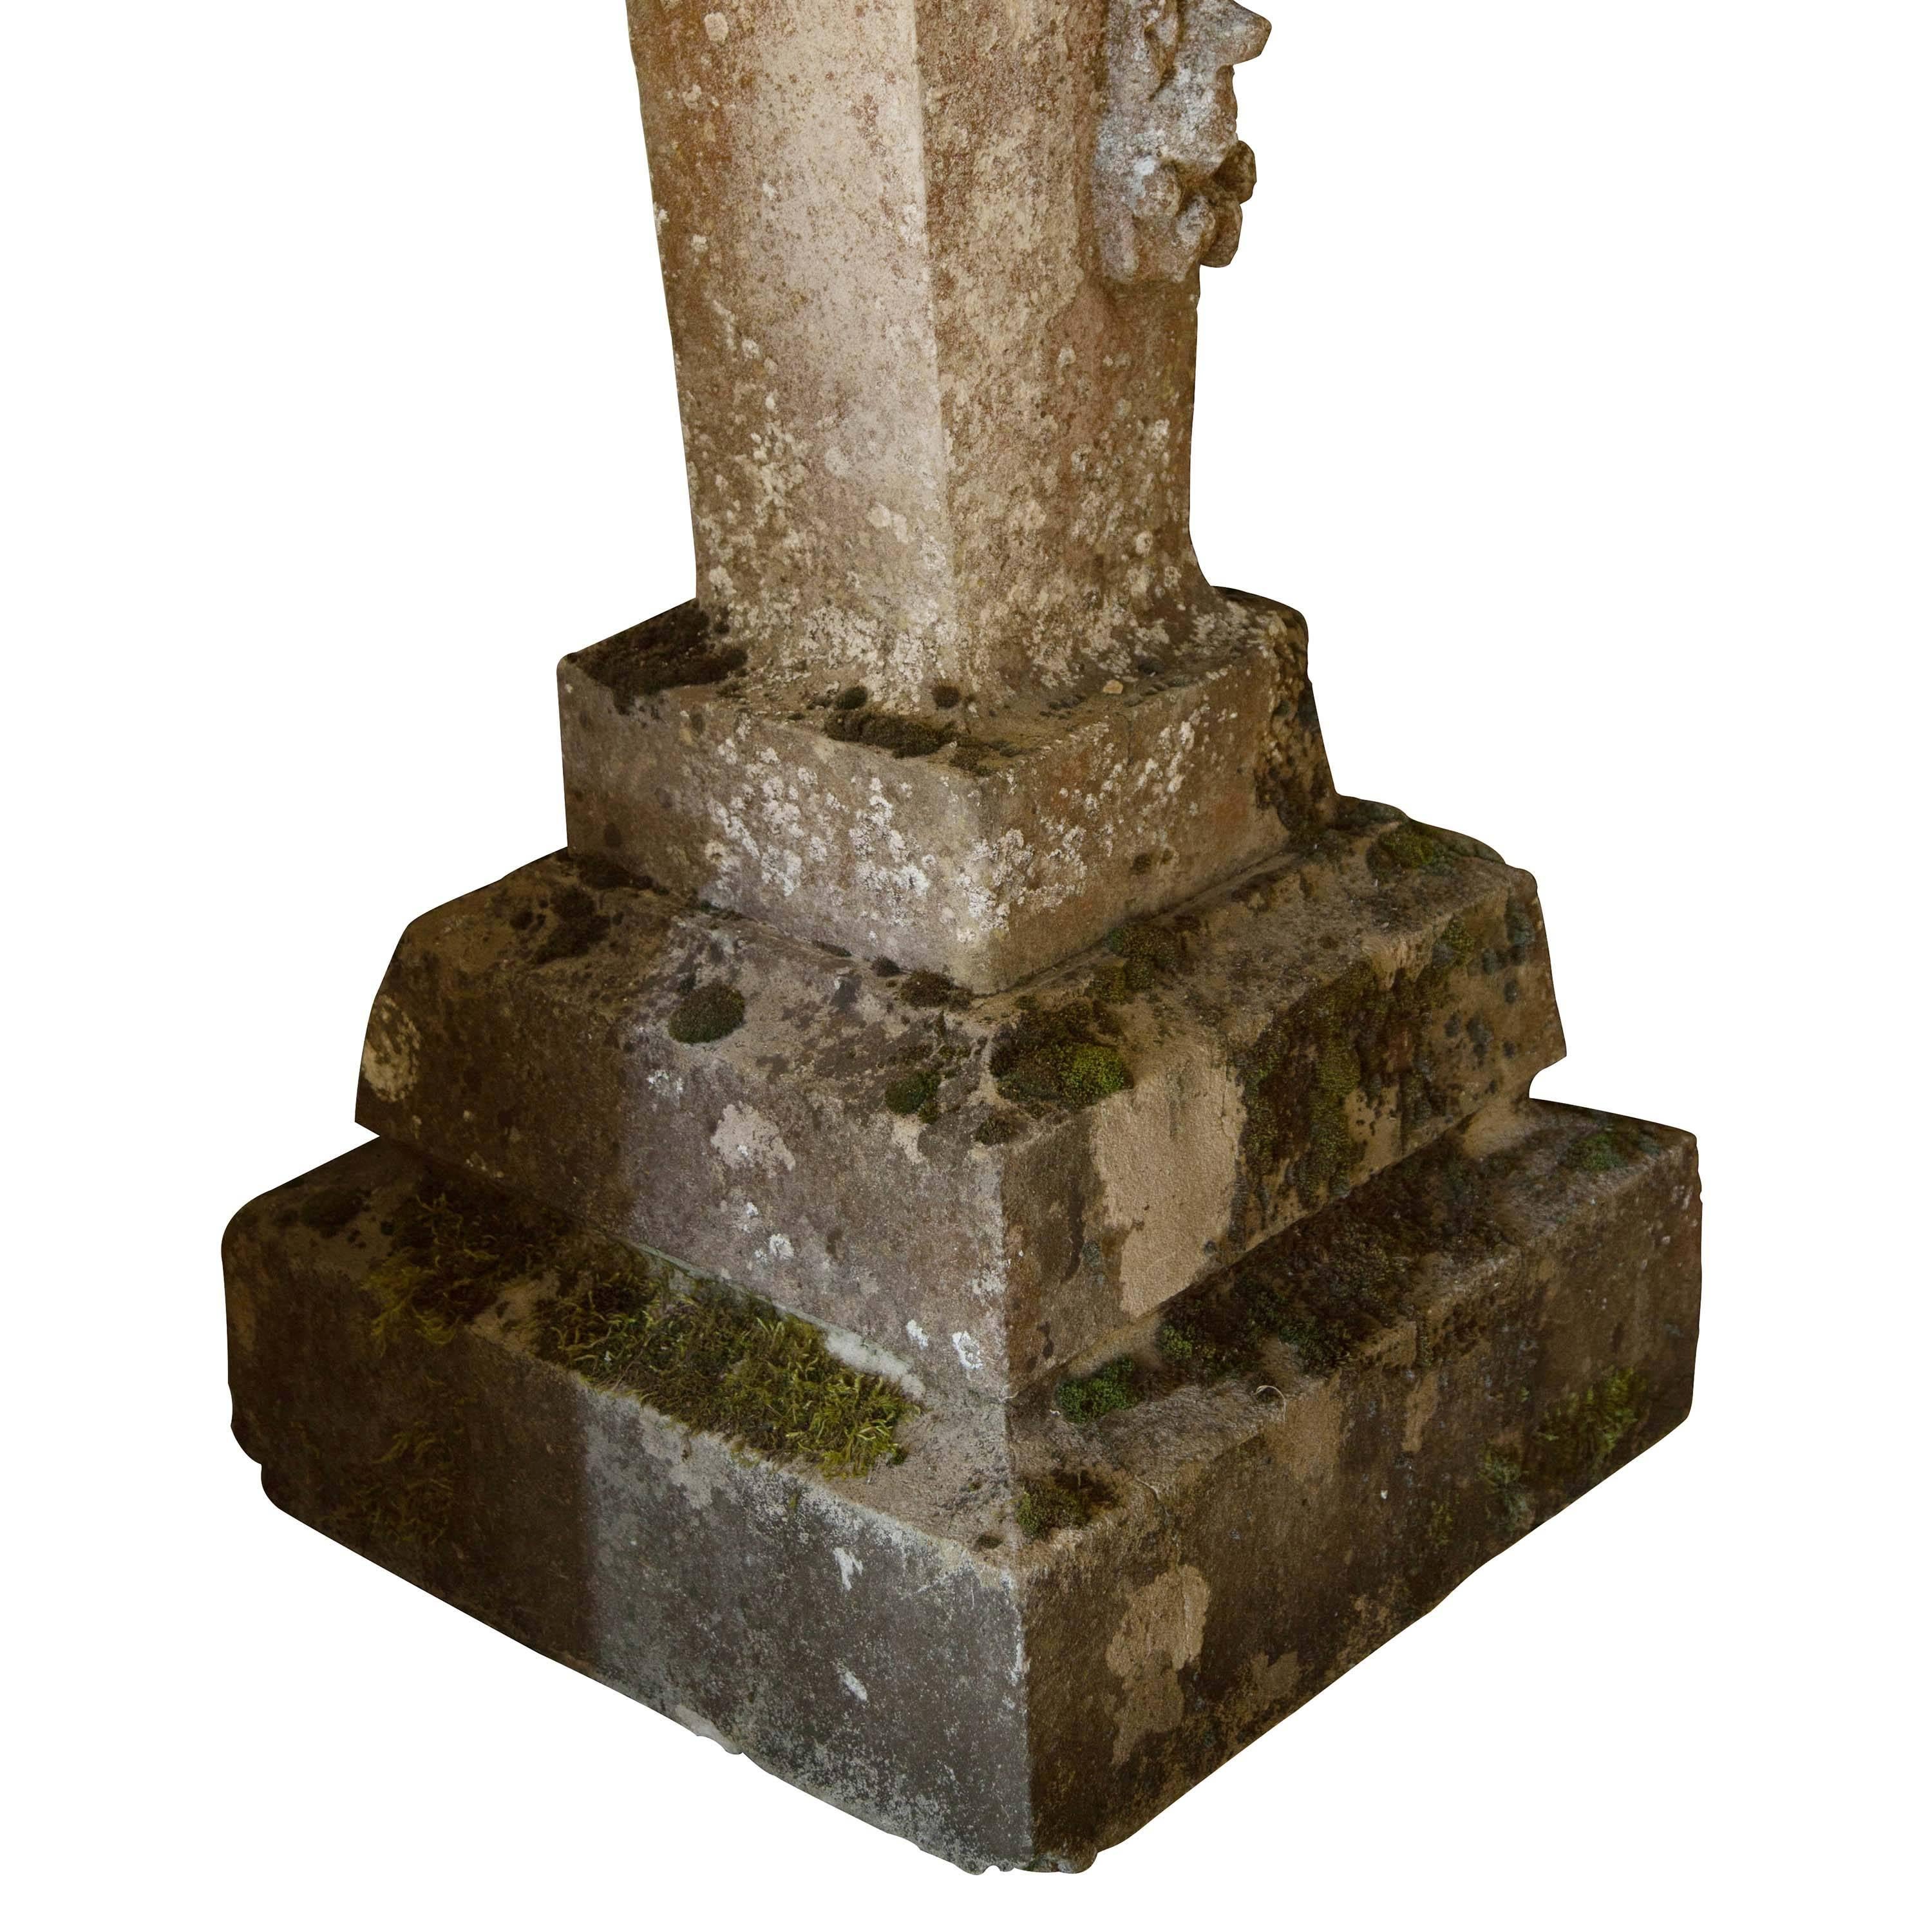 Composition Stone Figure of Pan 2